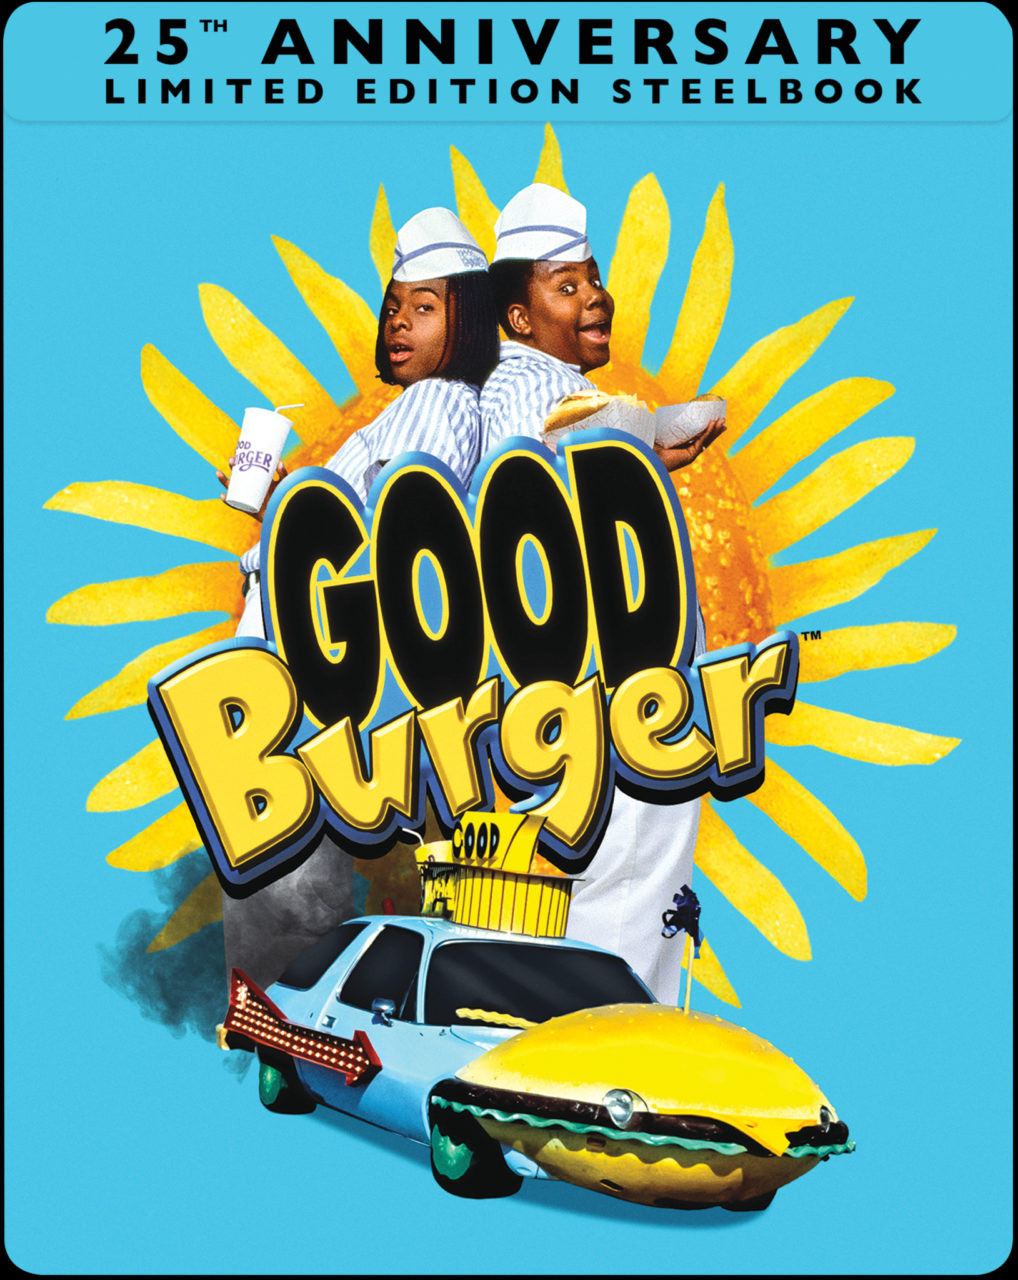 Good Burger 25th Anniversary Limited Edition Steelbook cover (Paramount Home Entertainment)